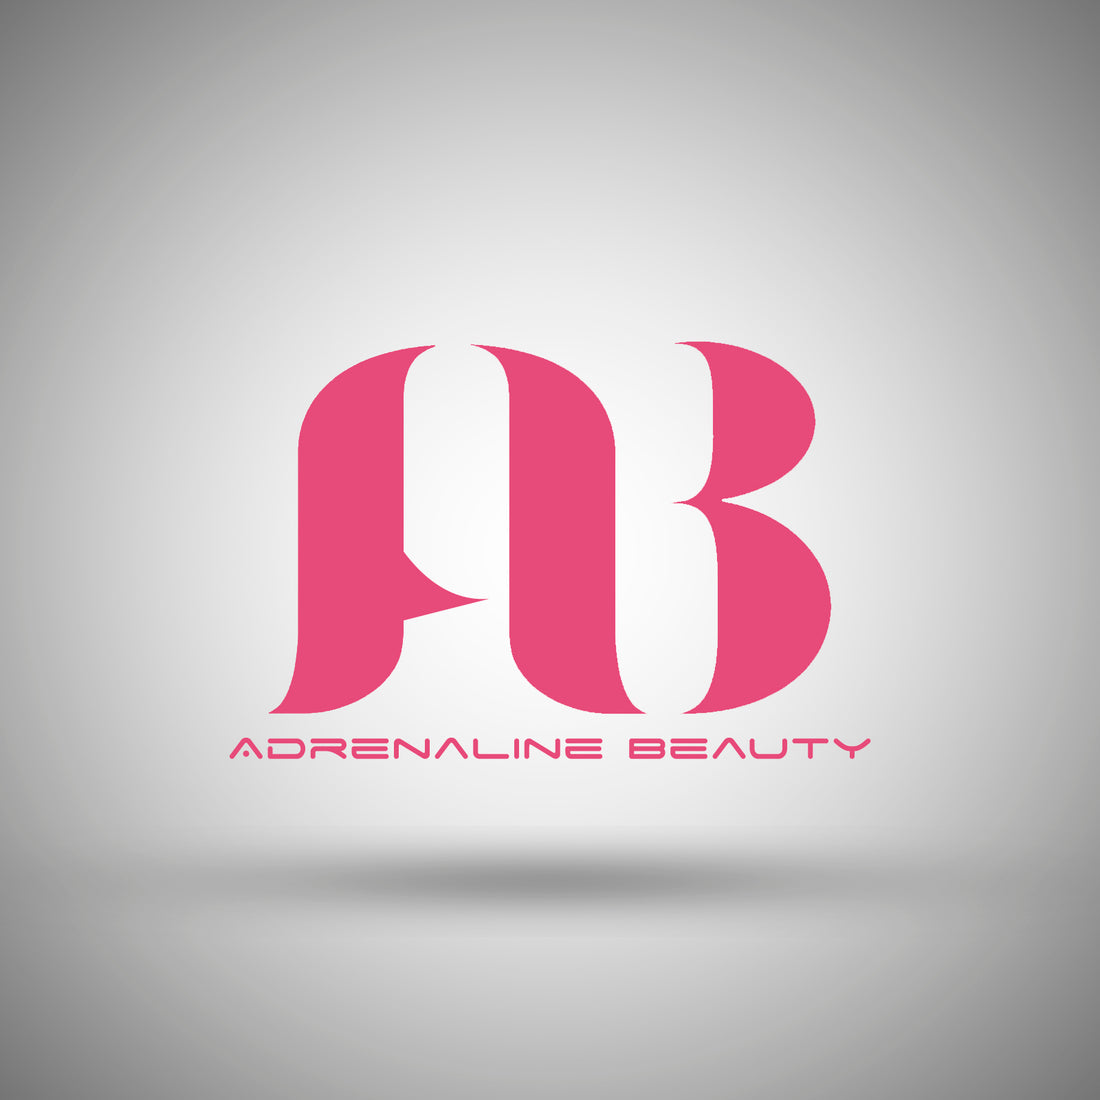 Welcome to Adrenaline Beauty